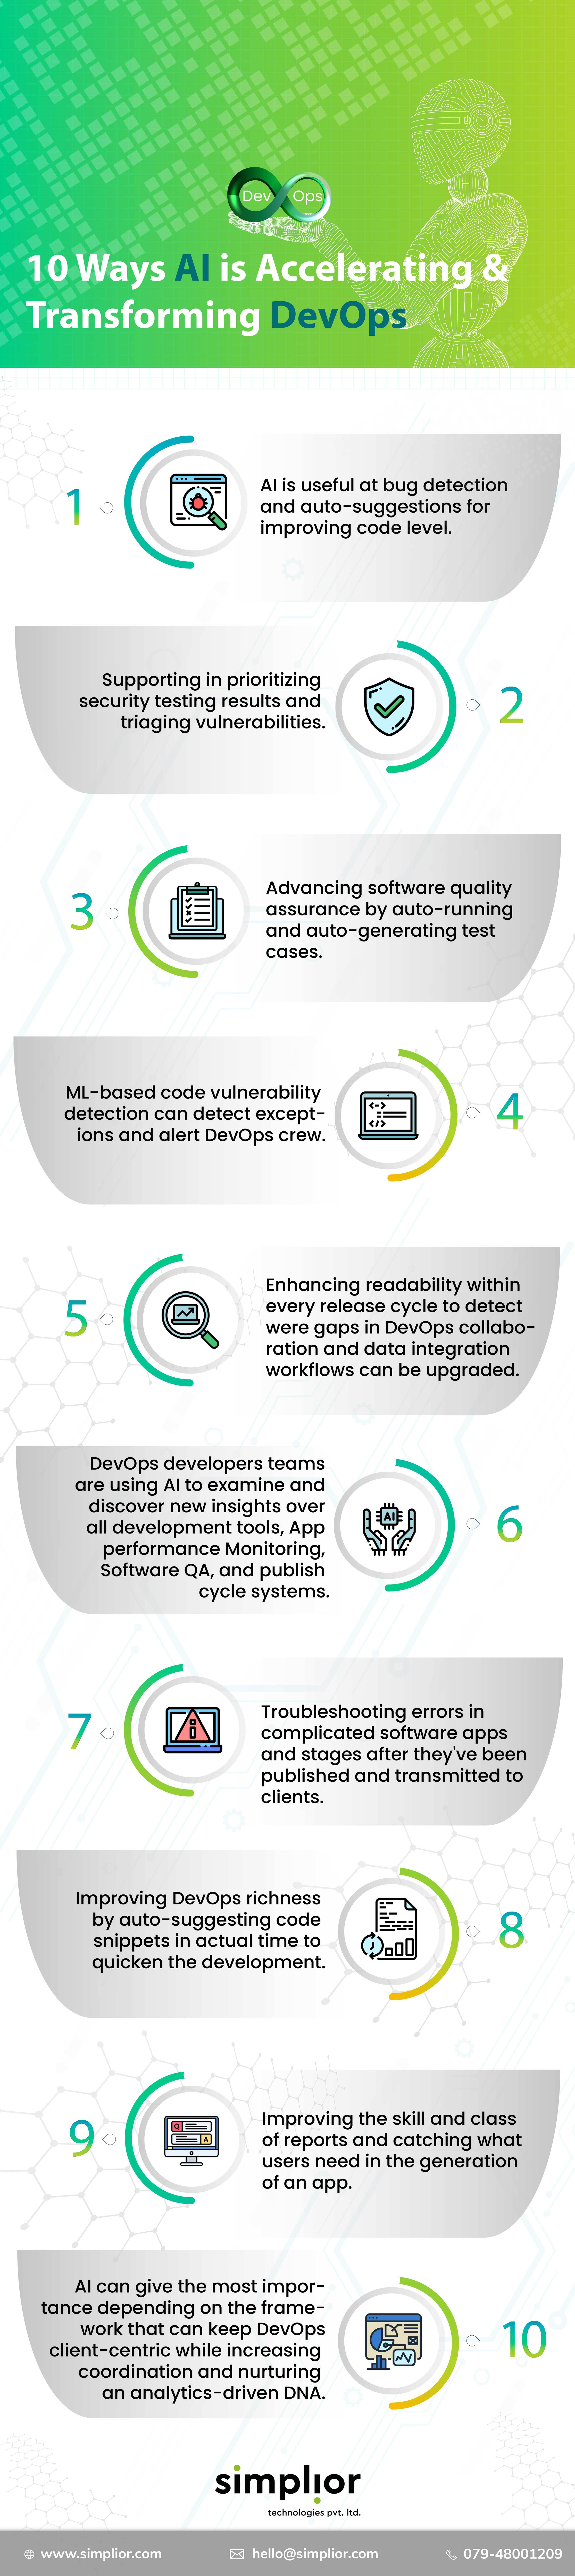 10 Ways AI is Accelerating & Transforming DevOps